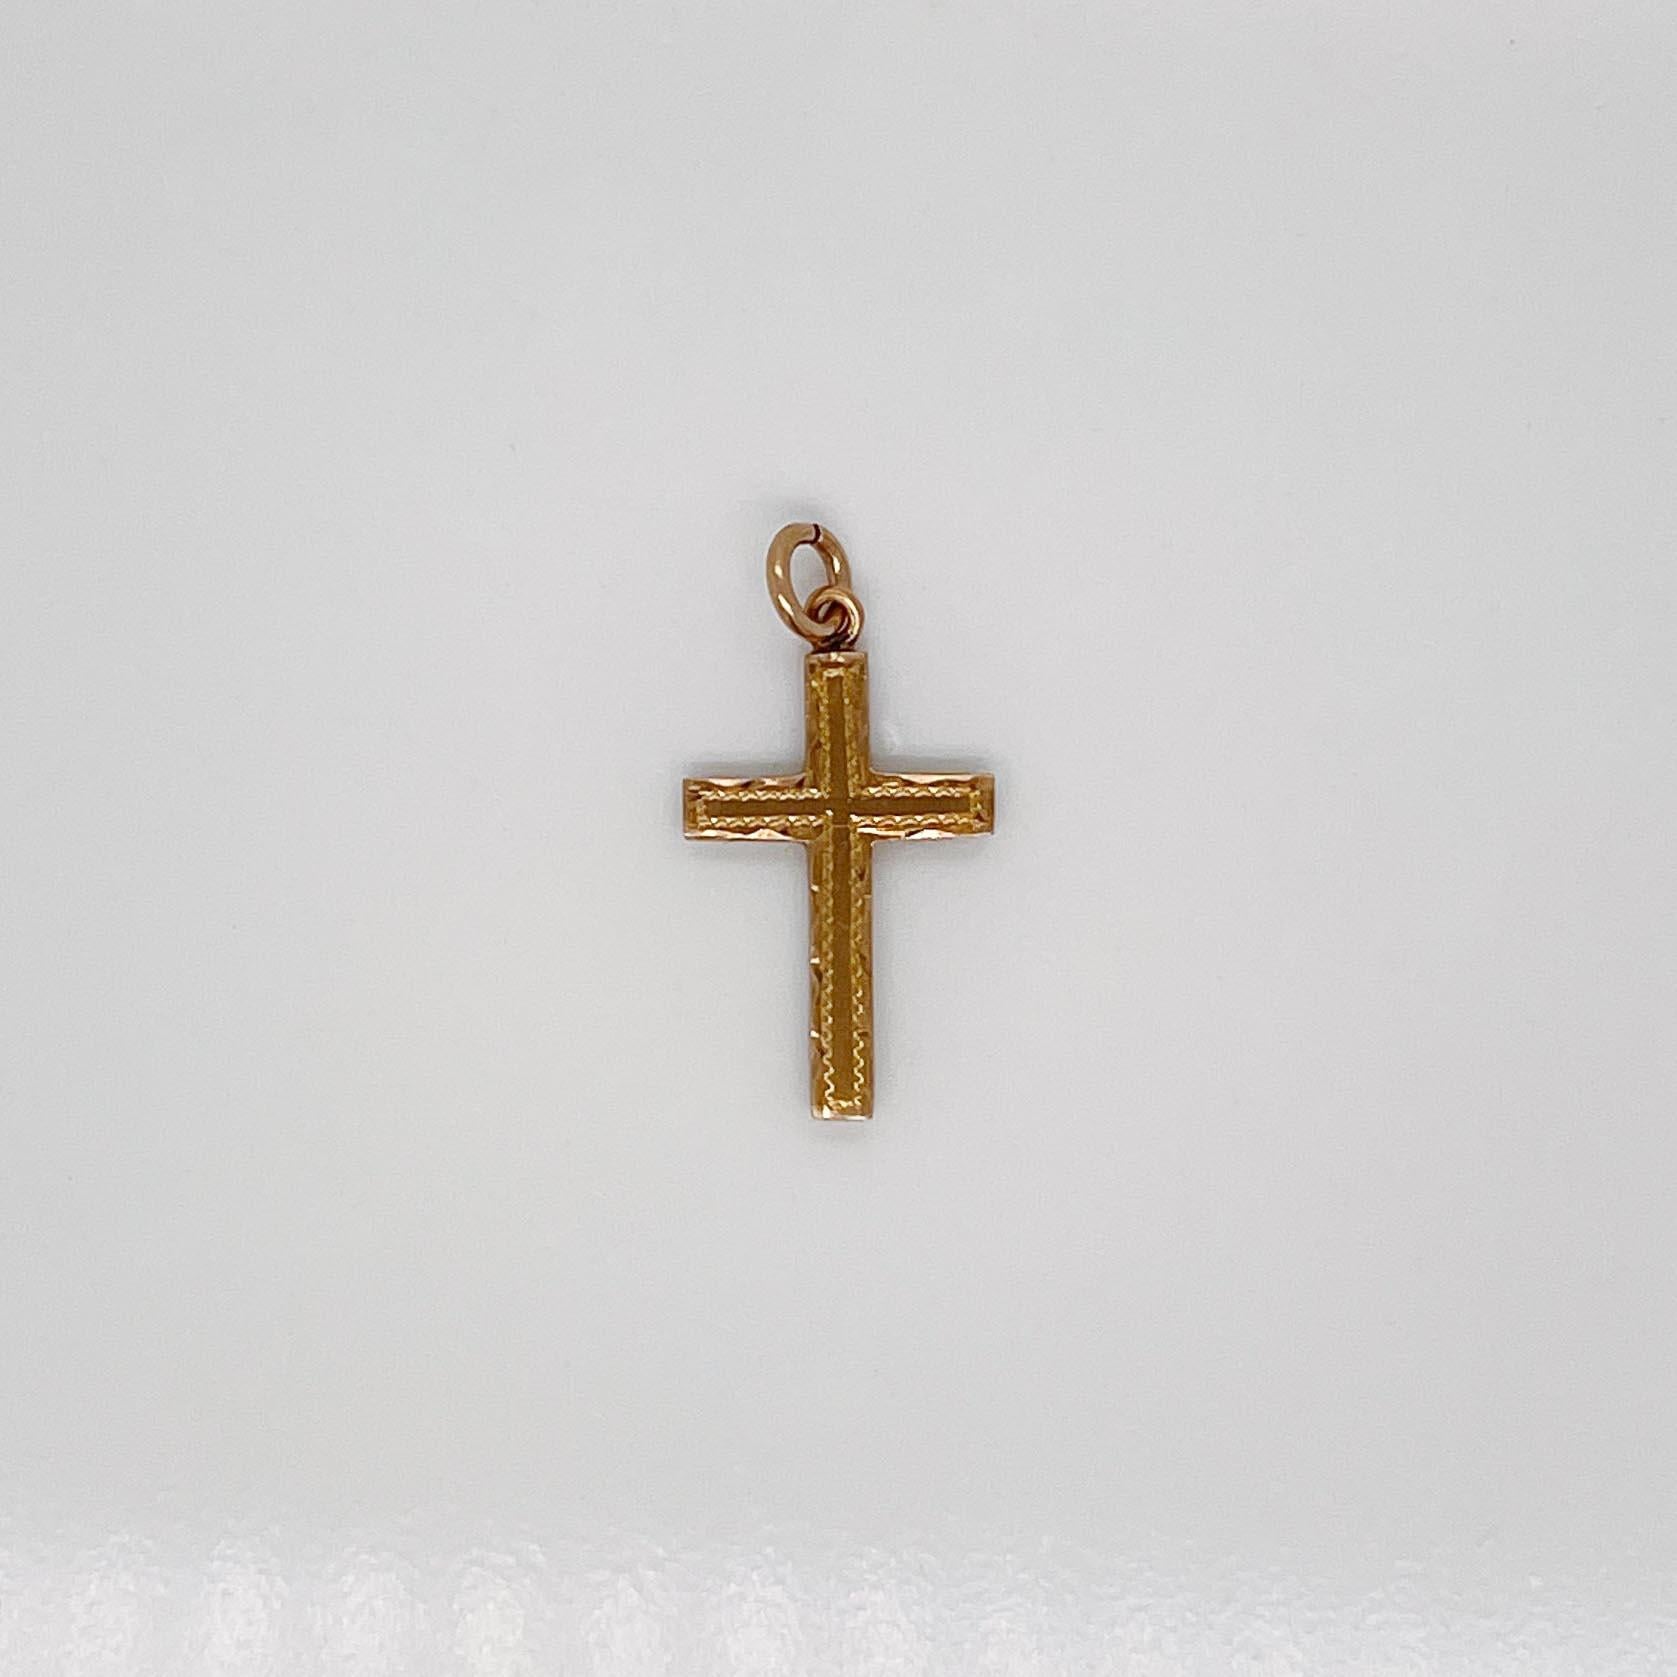 A very fine, small cross charm pendant.

In 10 karat yellow gold. 

With brite-cut decoration to the front. 

Set with a bail for attaching to a necklace or bracelet.

All in all, simply a wonderful cross pendant charm!

Date:
20th Century

Overall